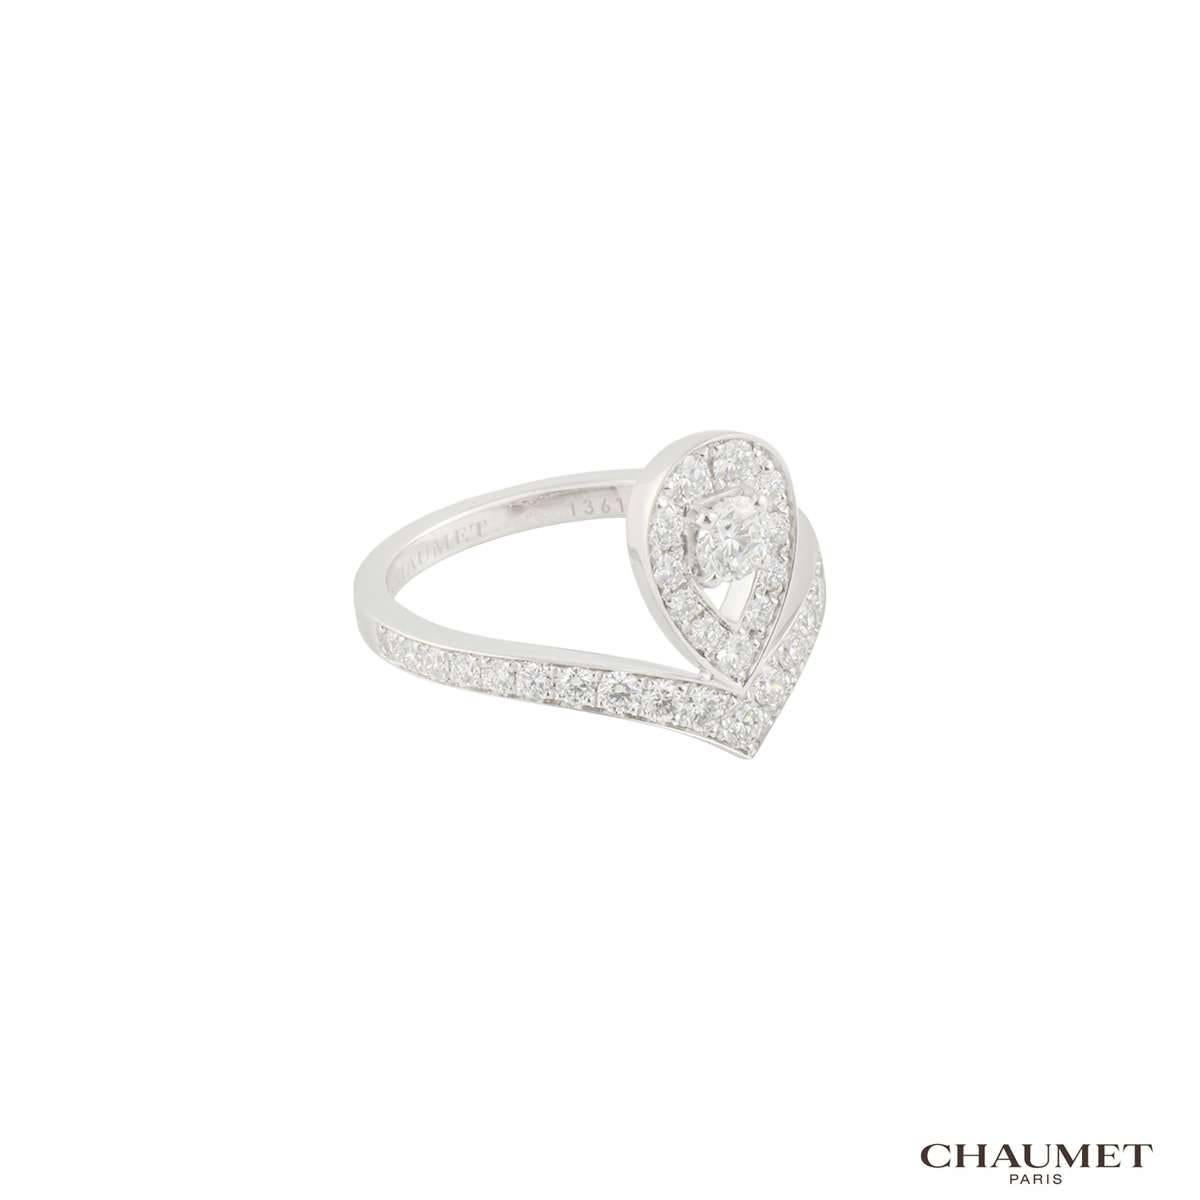 A stunning 18k white gold diamond Chaumet dress ring from the Josephine Aigrette collection. The ring comprises of a tiara style motif crowning the finger. The motif has a single round brilliant cut diamond weighing 0.18ct, G colour and VS+ clarity